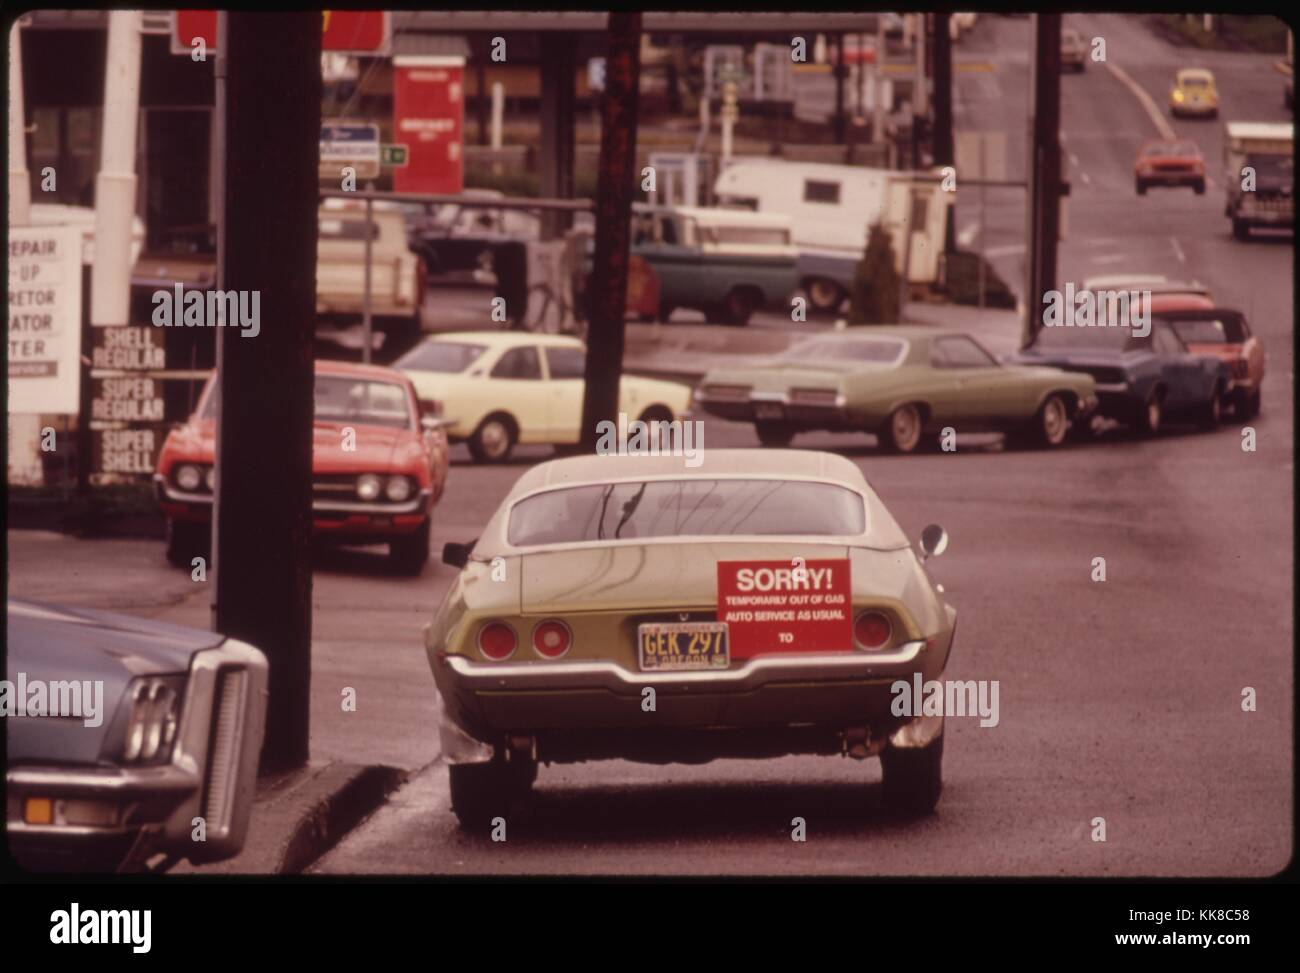 After Hours in a Gasoline Line a Driver Could Arrive at the Pumps and Find Out That the Car Ahead of Him Was the Last to Get Fuel. So Many Stations, Such as This One in Portland, Began Using a 'Sorry' Sign on the Last Car to Get Gas. Image courtesy National Archives, 1973. Stock Photo